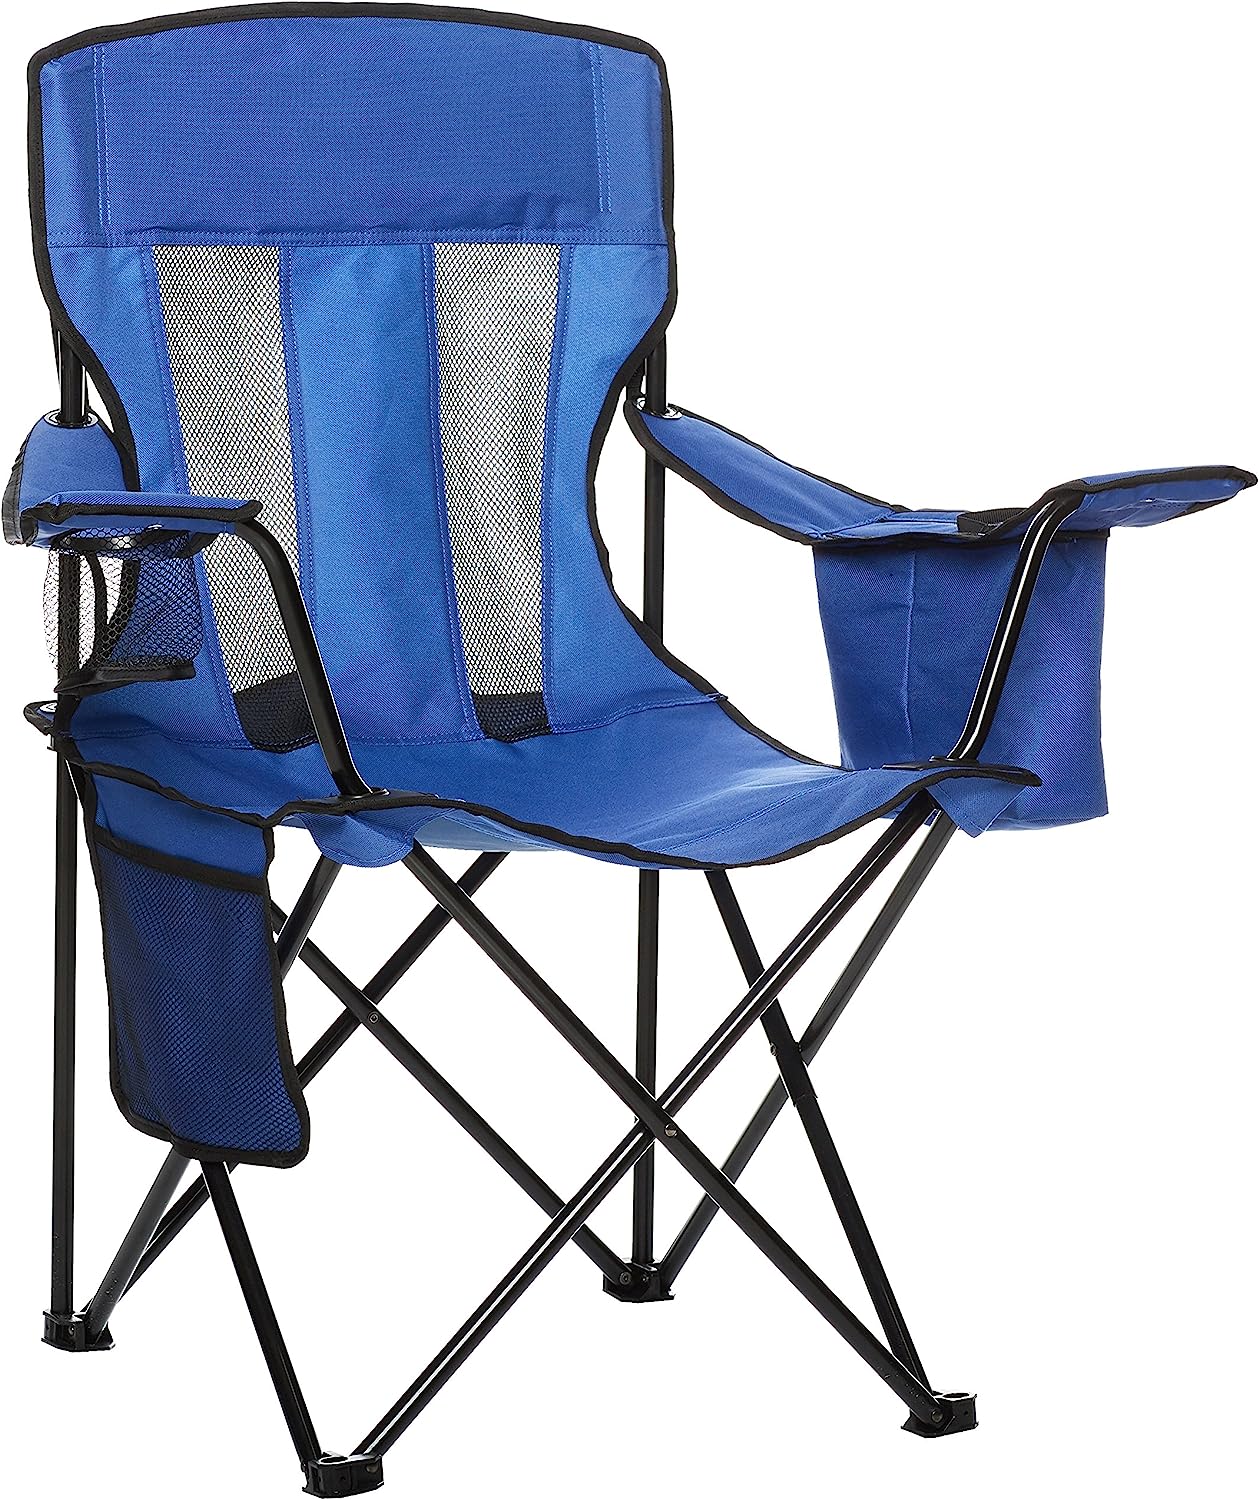 Amazon Basics Portable Folding Camping Chair with [...]